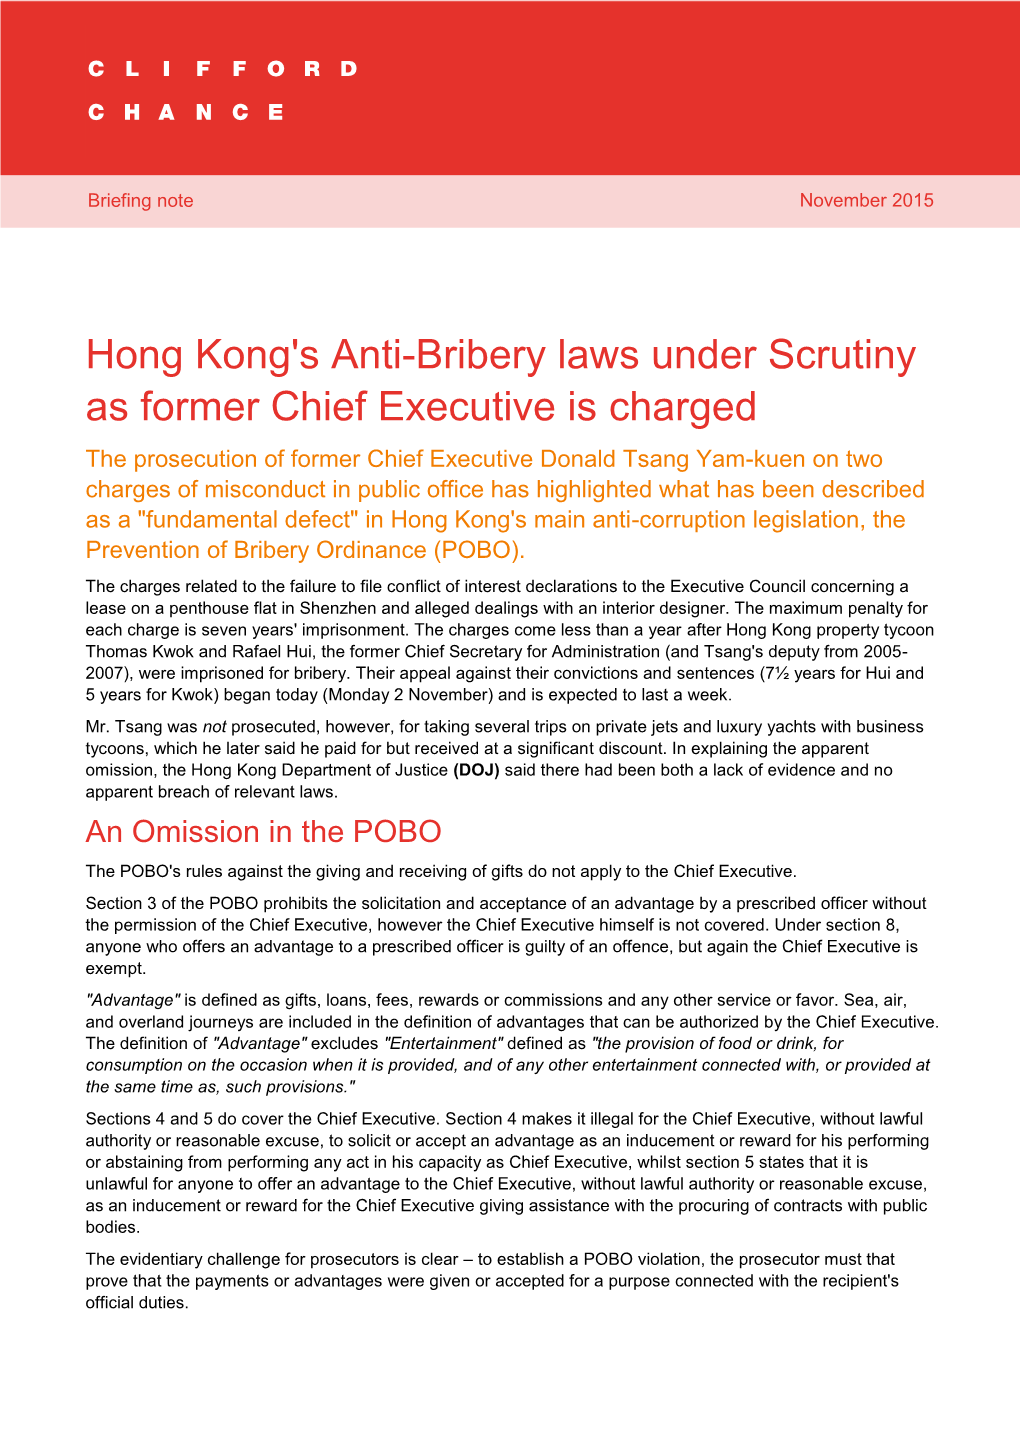 Hong Kong's Anti-Bribery Laws Under Scrutiny As Former Chief Executive Is Charged 1